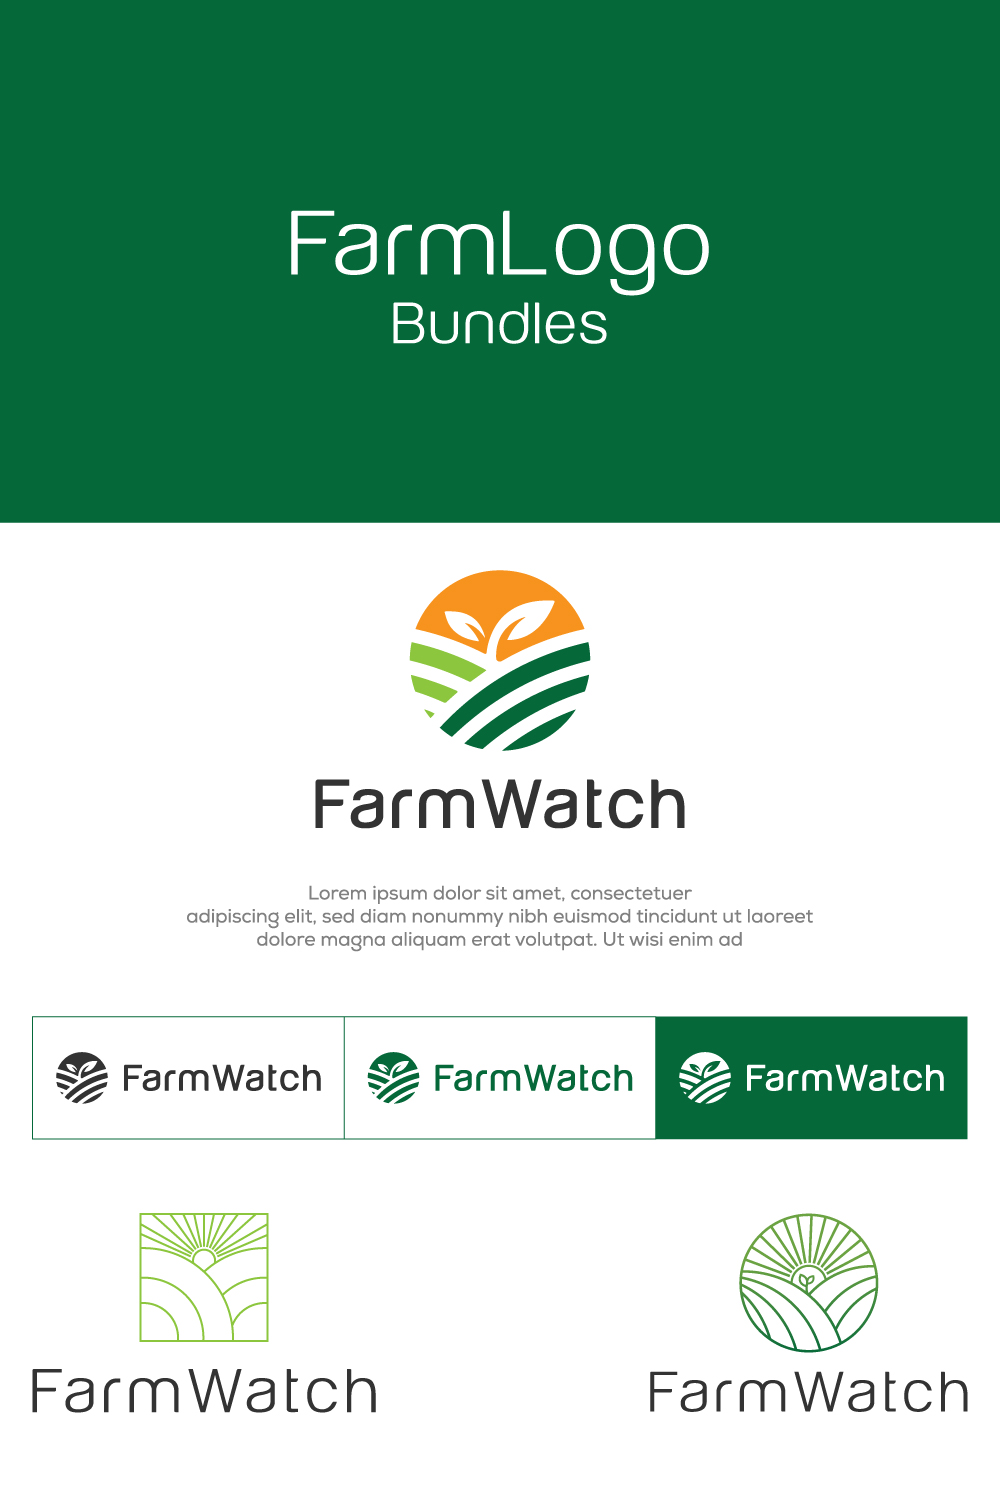 Image with enchanting logos for the farm.